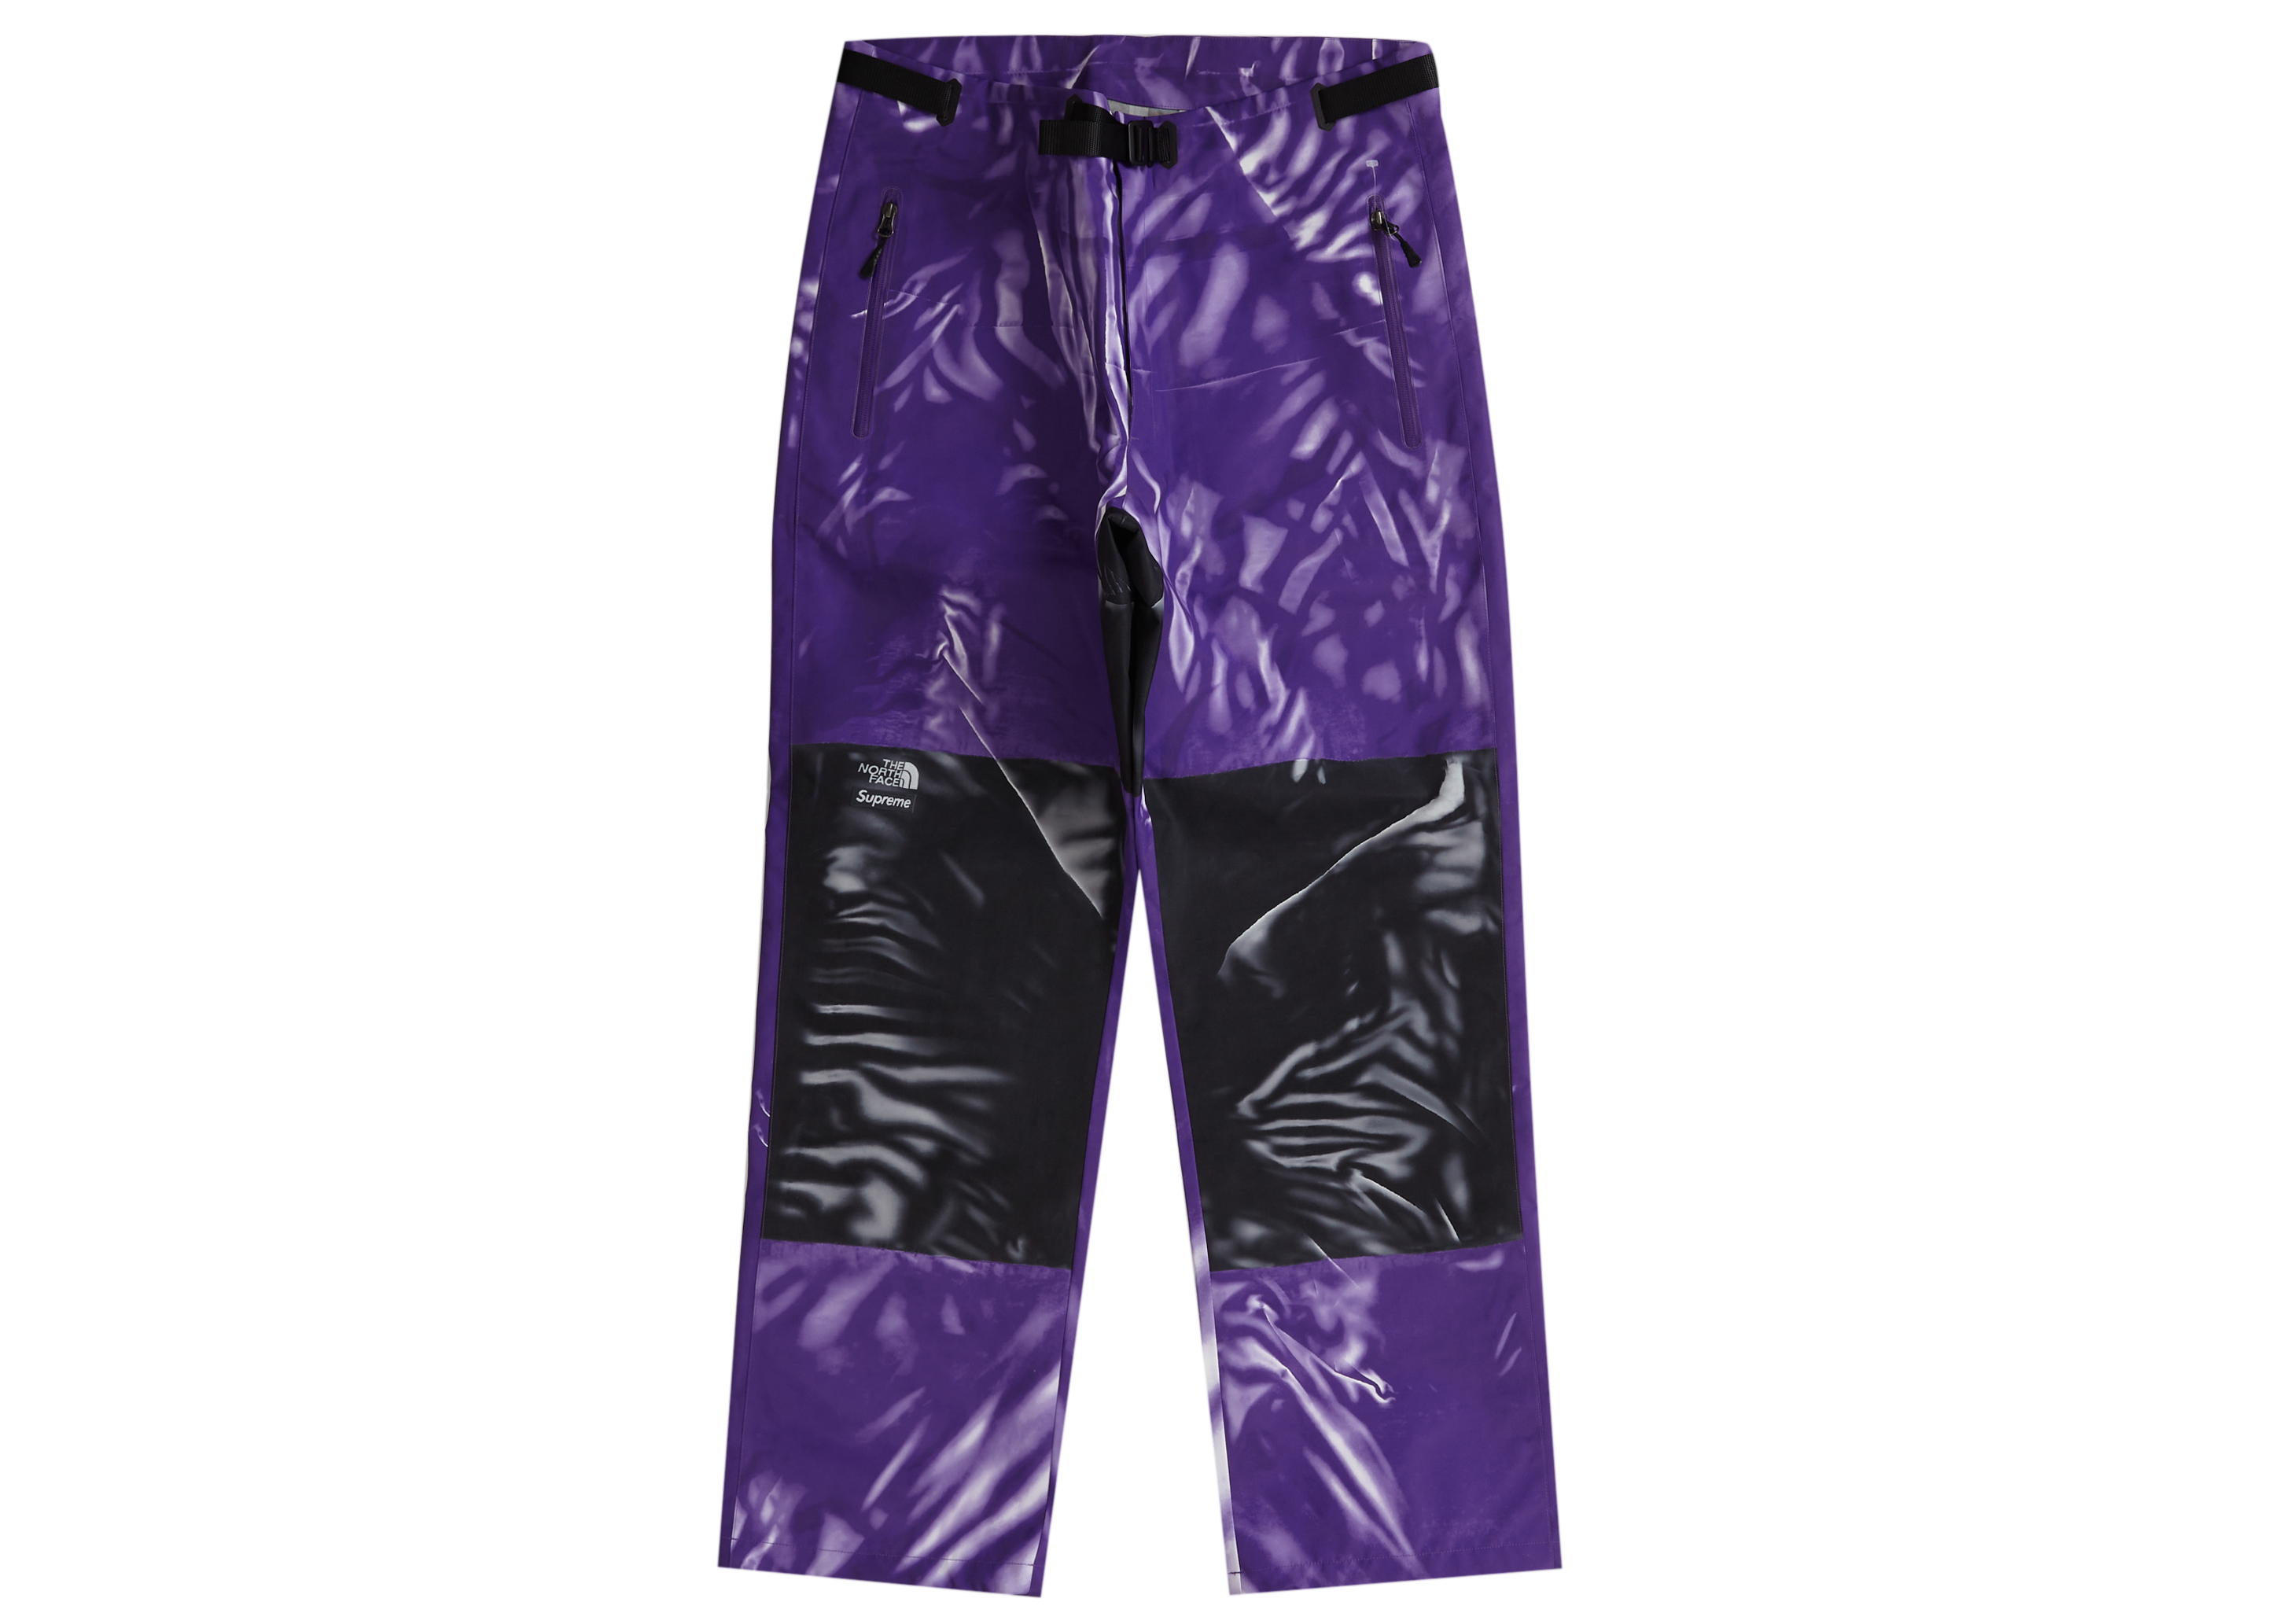 Supreme North Face Mountain Pant